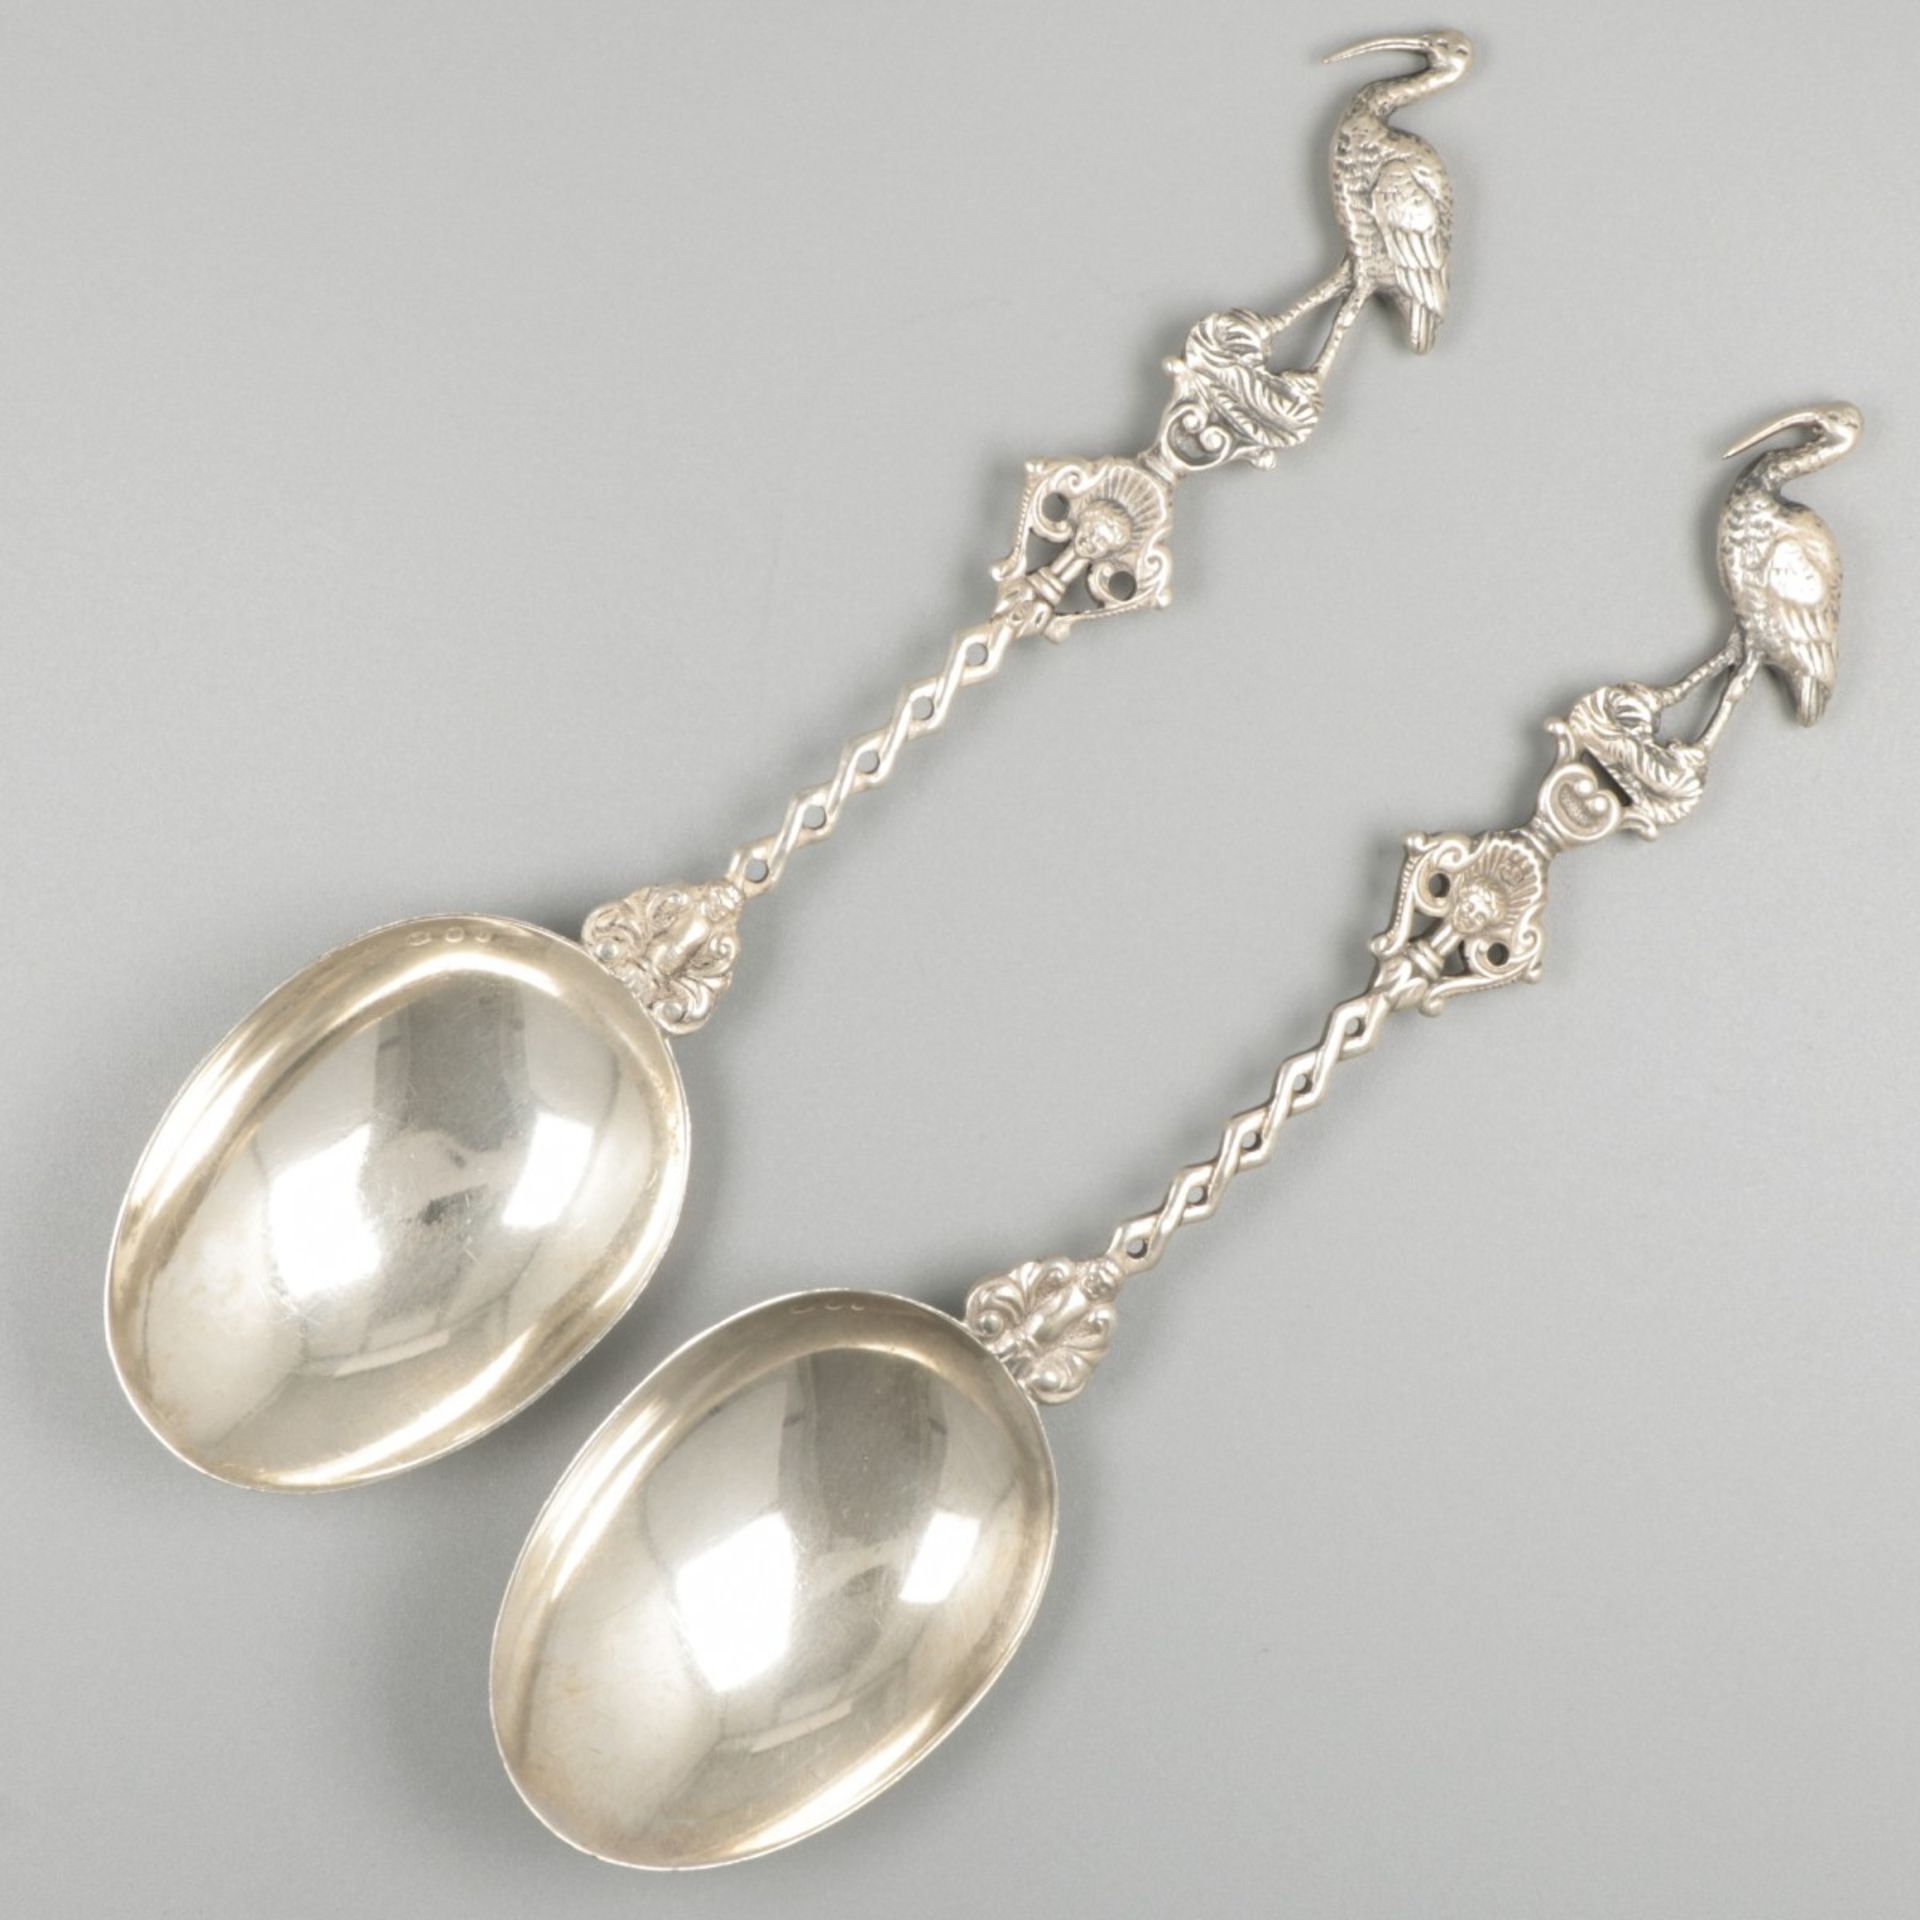 2-piece set of silver occasion spoons.